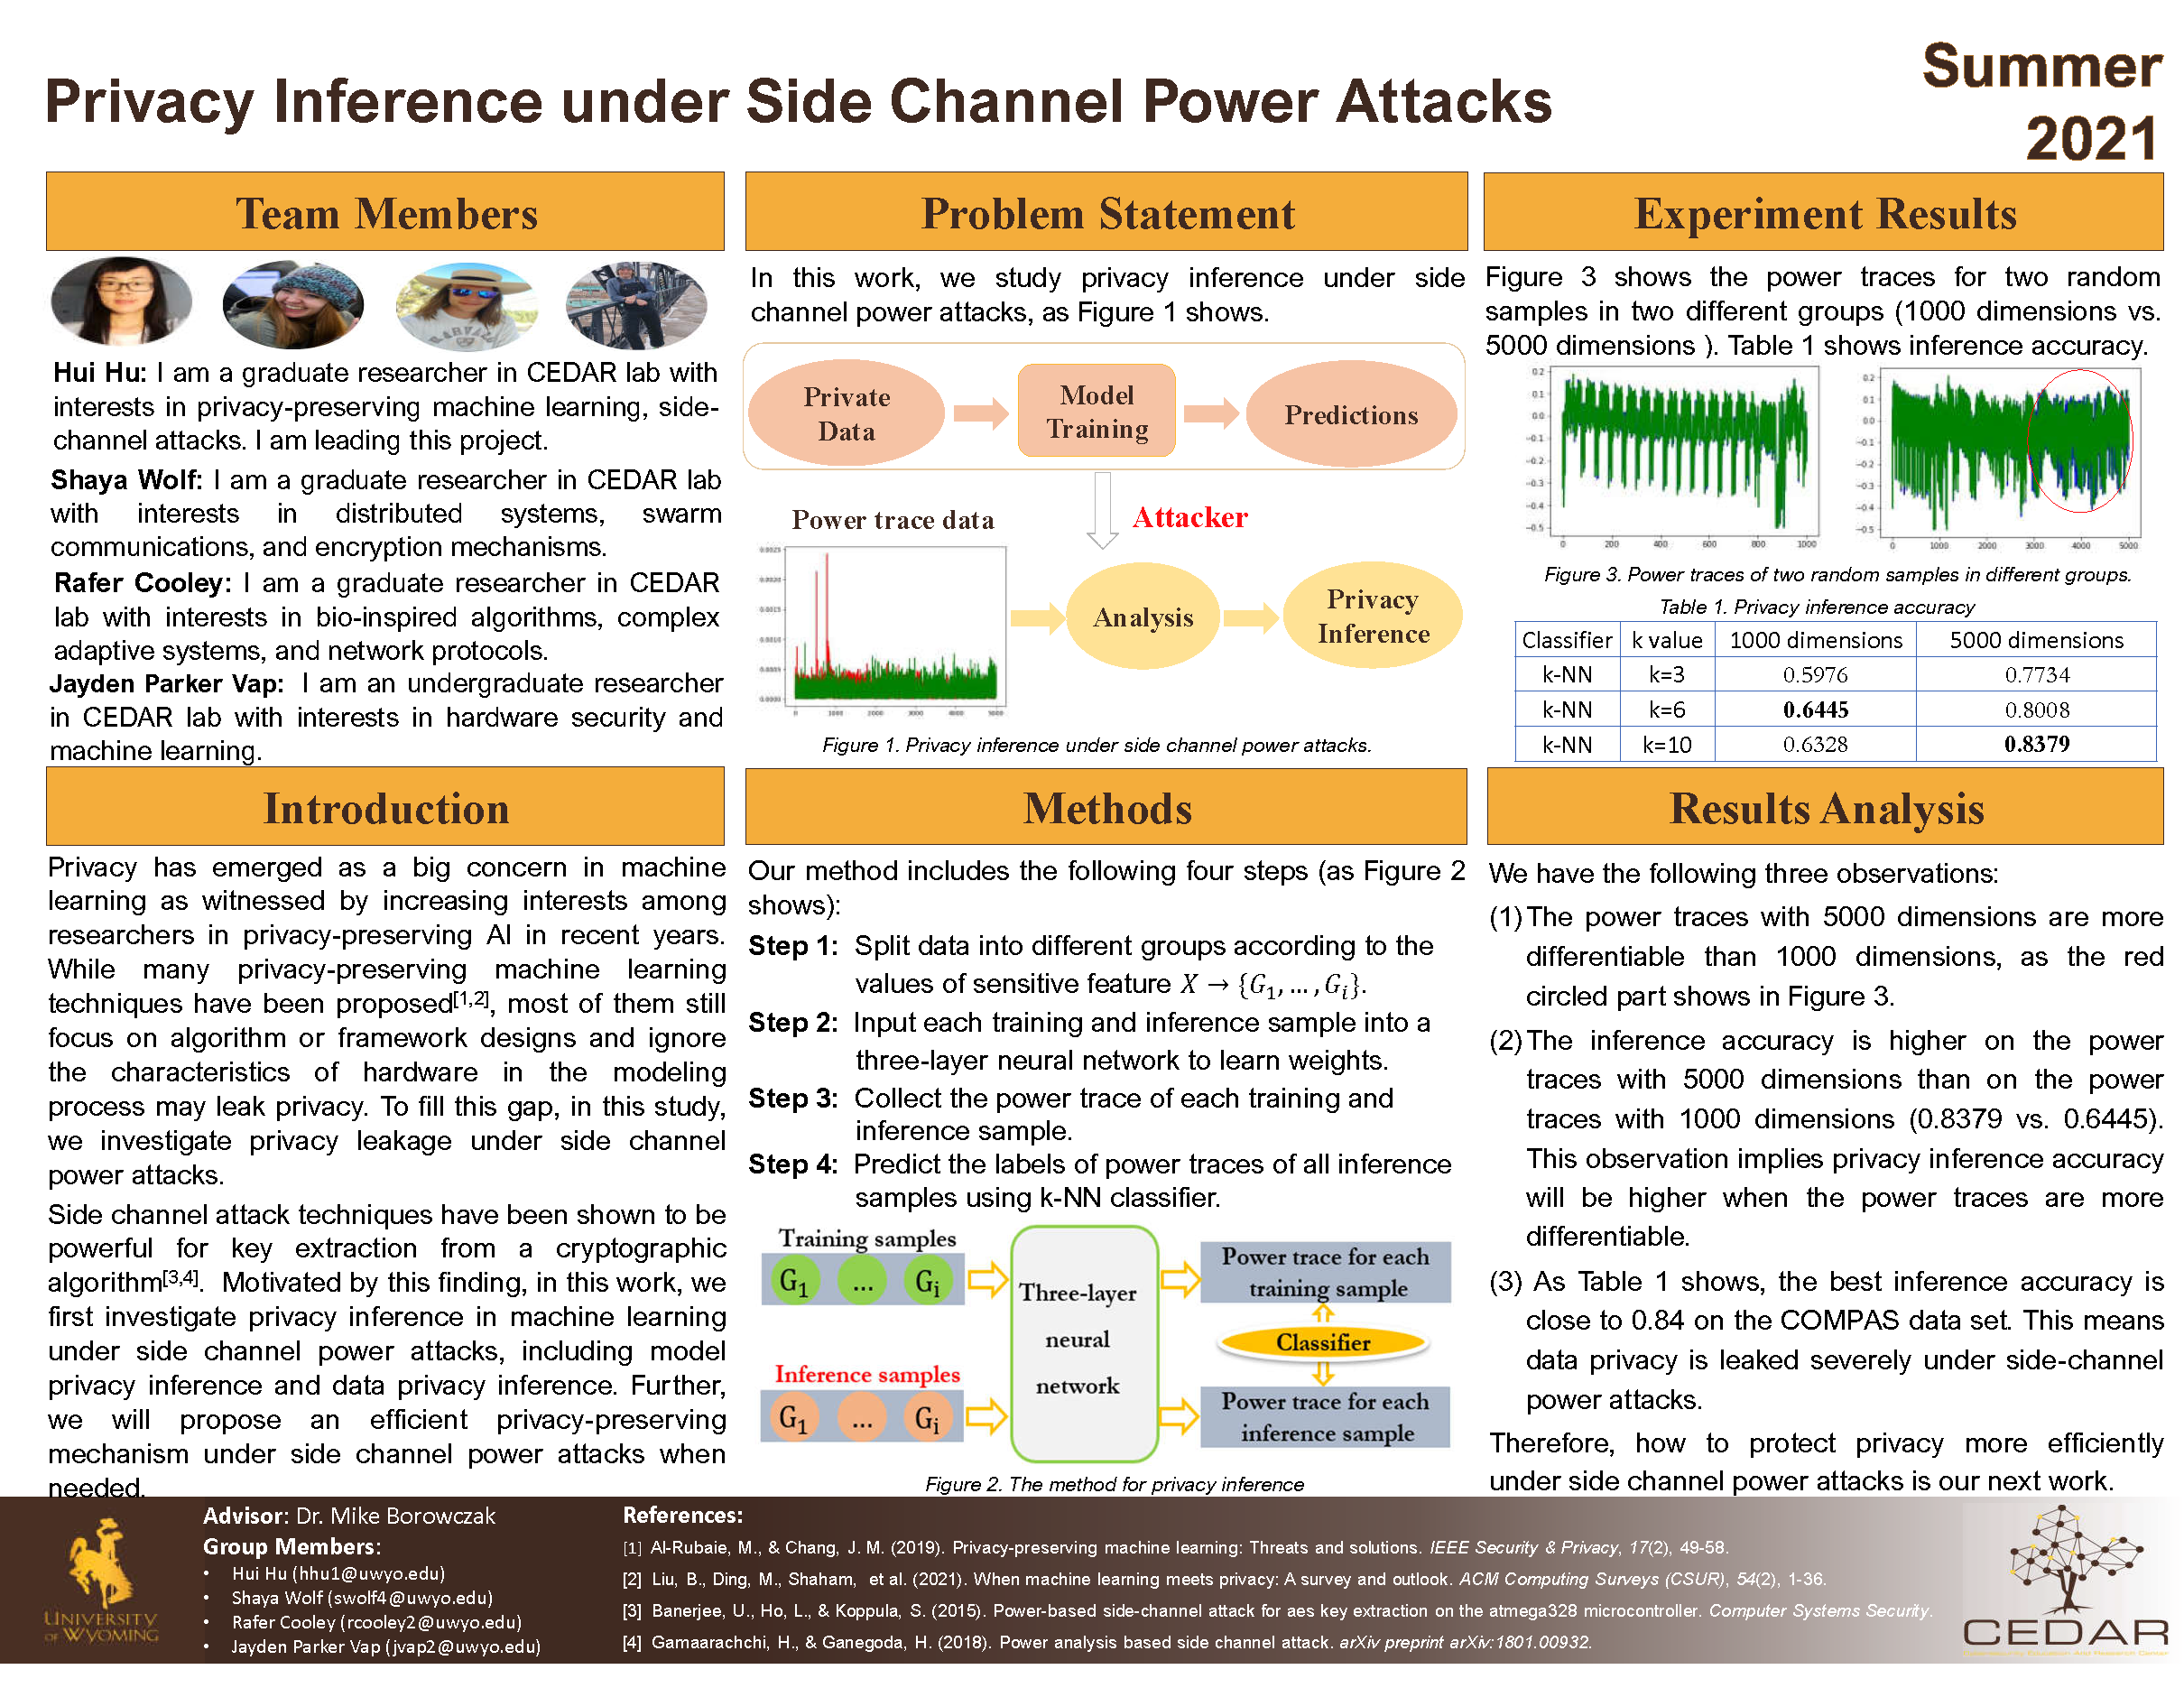  Poster for Privacy Inference under Side Channel Power Attacks